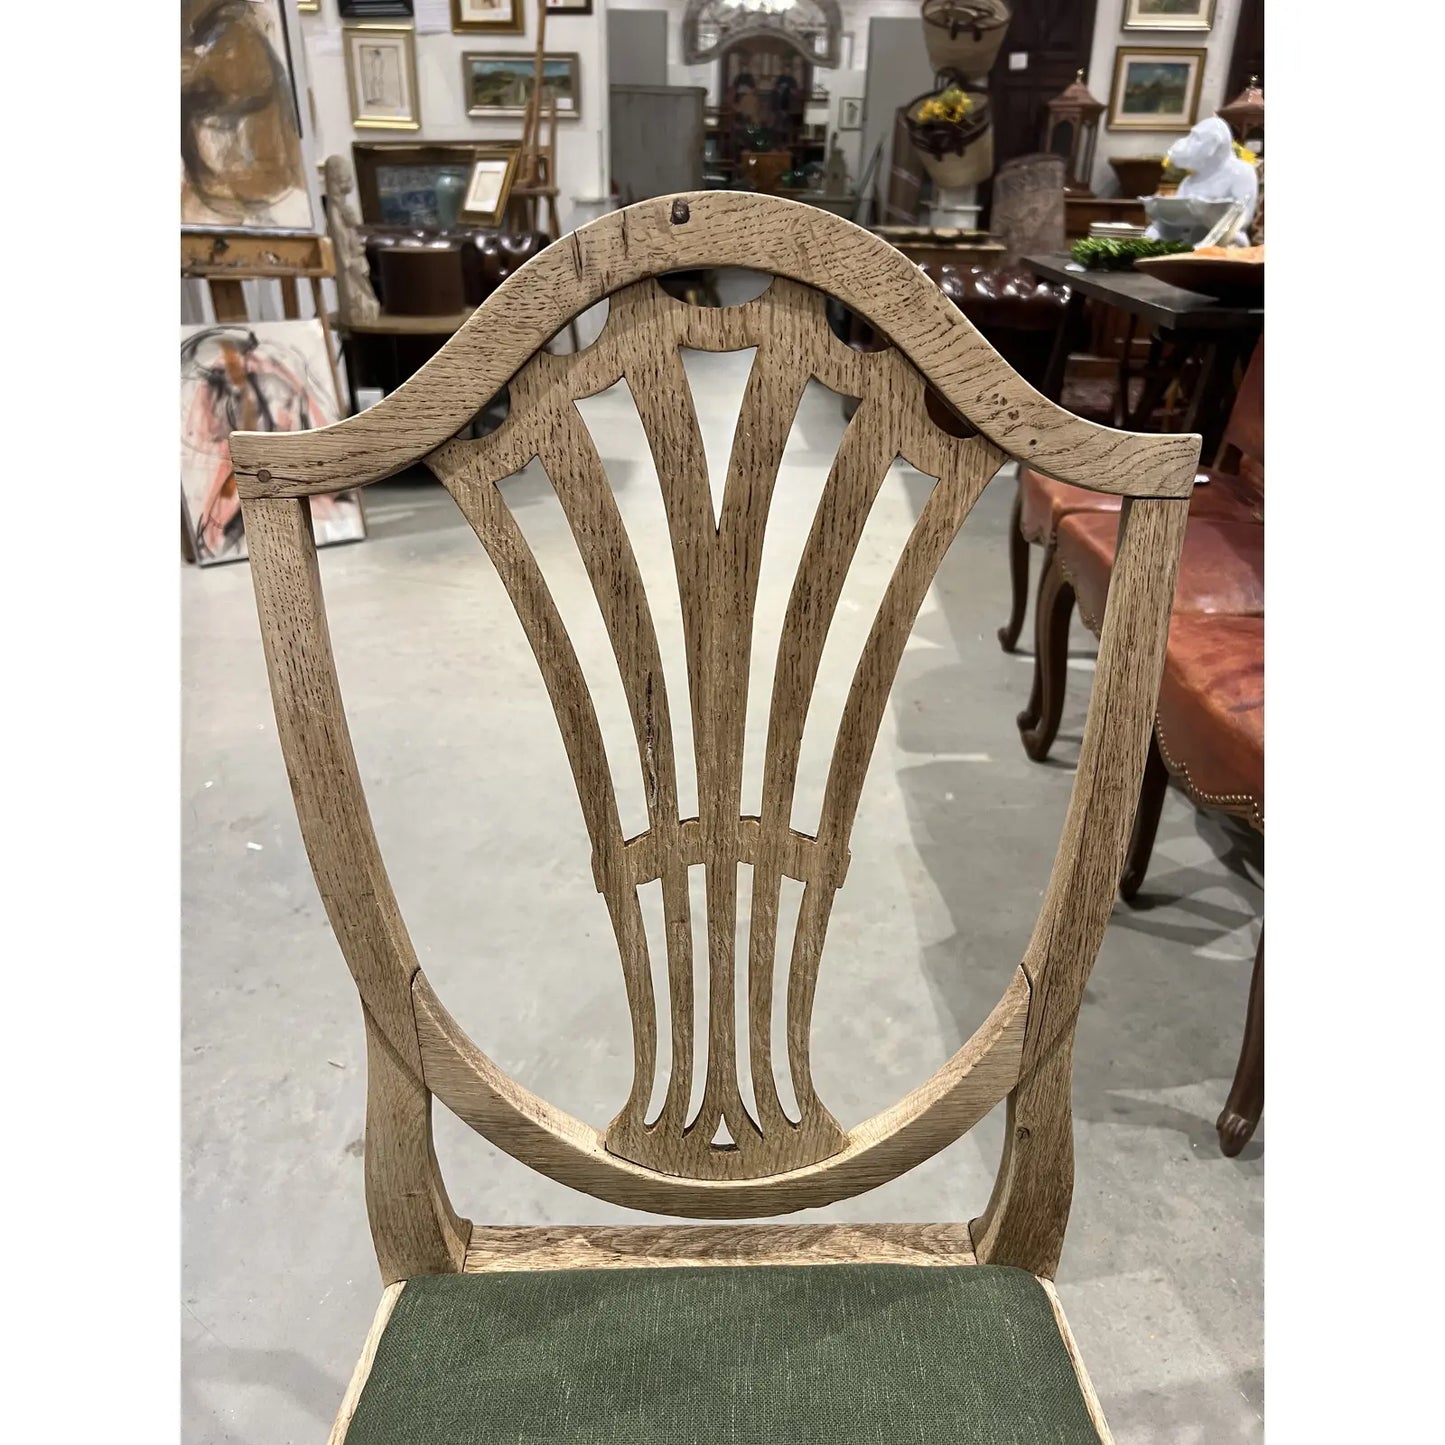 Bleached Oak Dining Chairs - Set of 4 - The White Barn Antiques